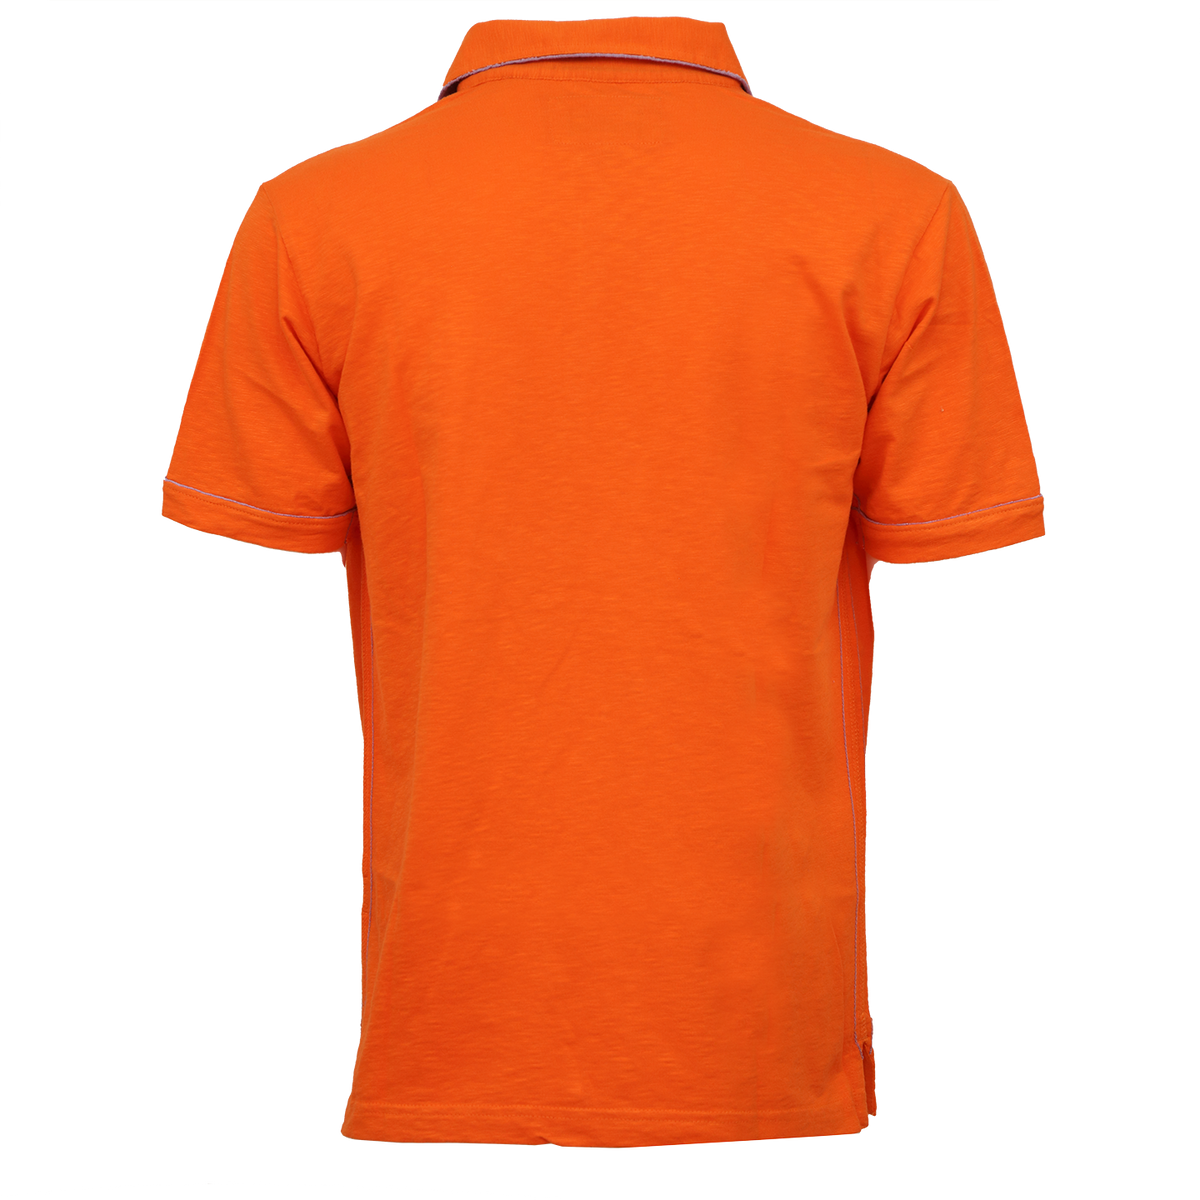 Orange with Lavender Trim Polo with White Tiger Paw